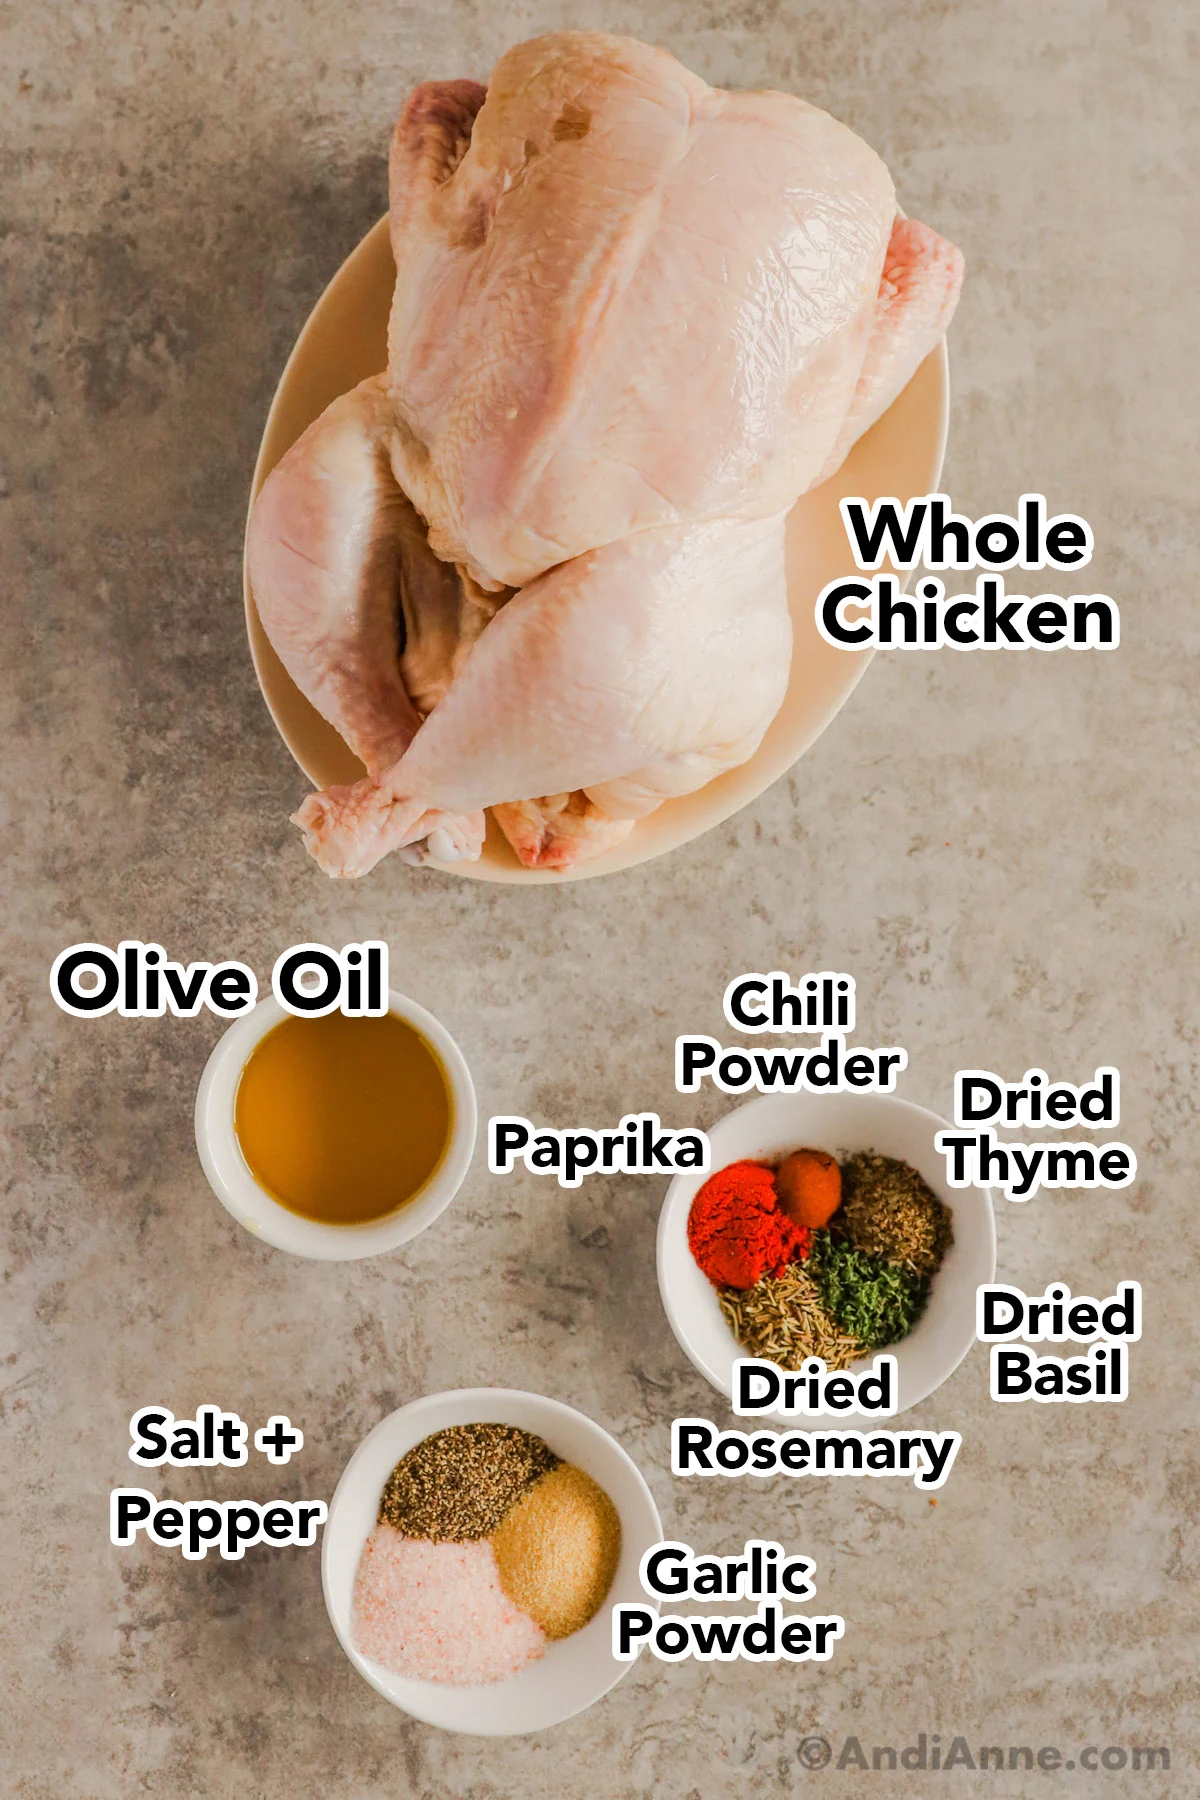 Recipe ingredients including a raw whole chicken, small bowl of olive oil, and two small plates with various spices on them.